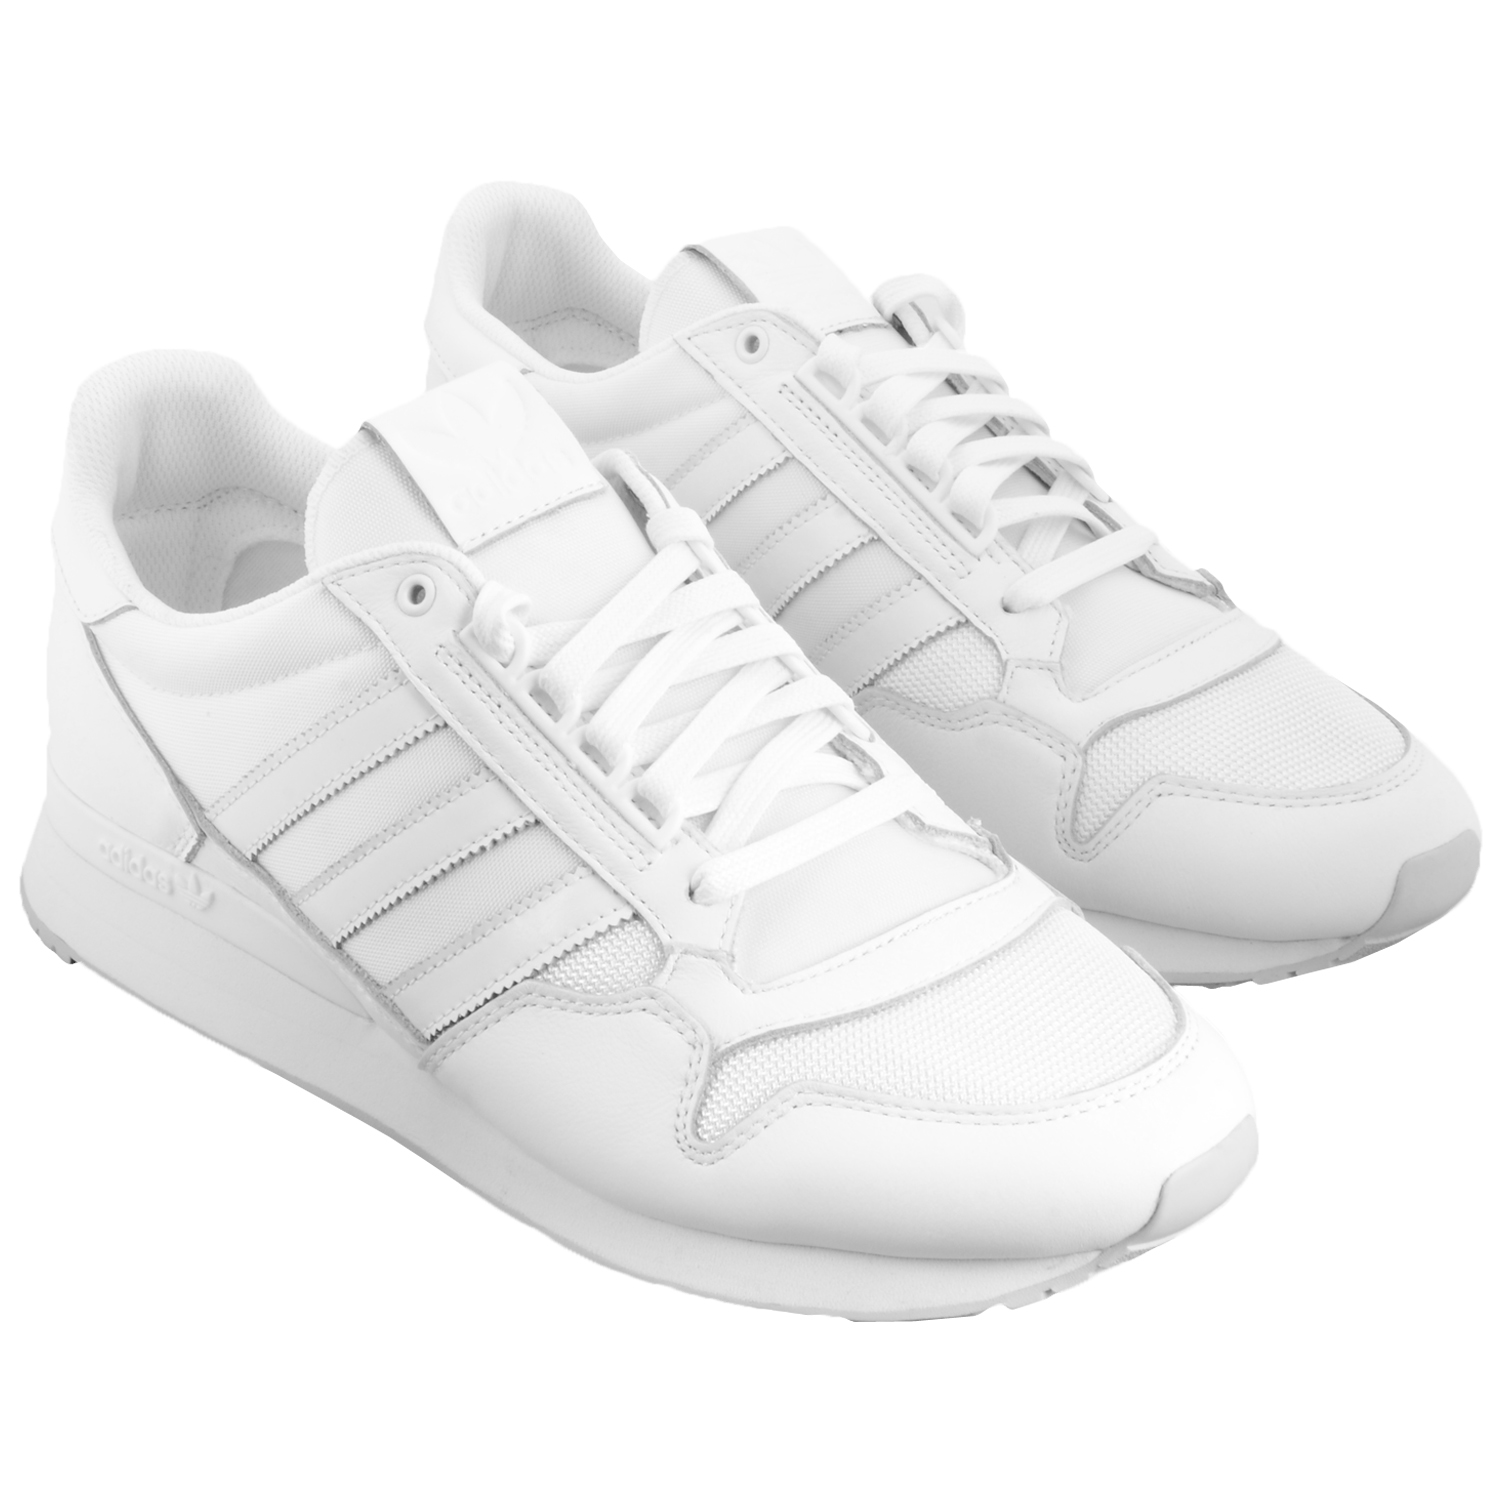 adidas zx 500 homme or